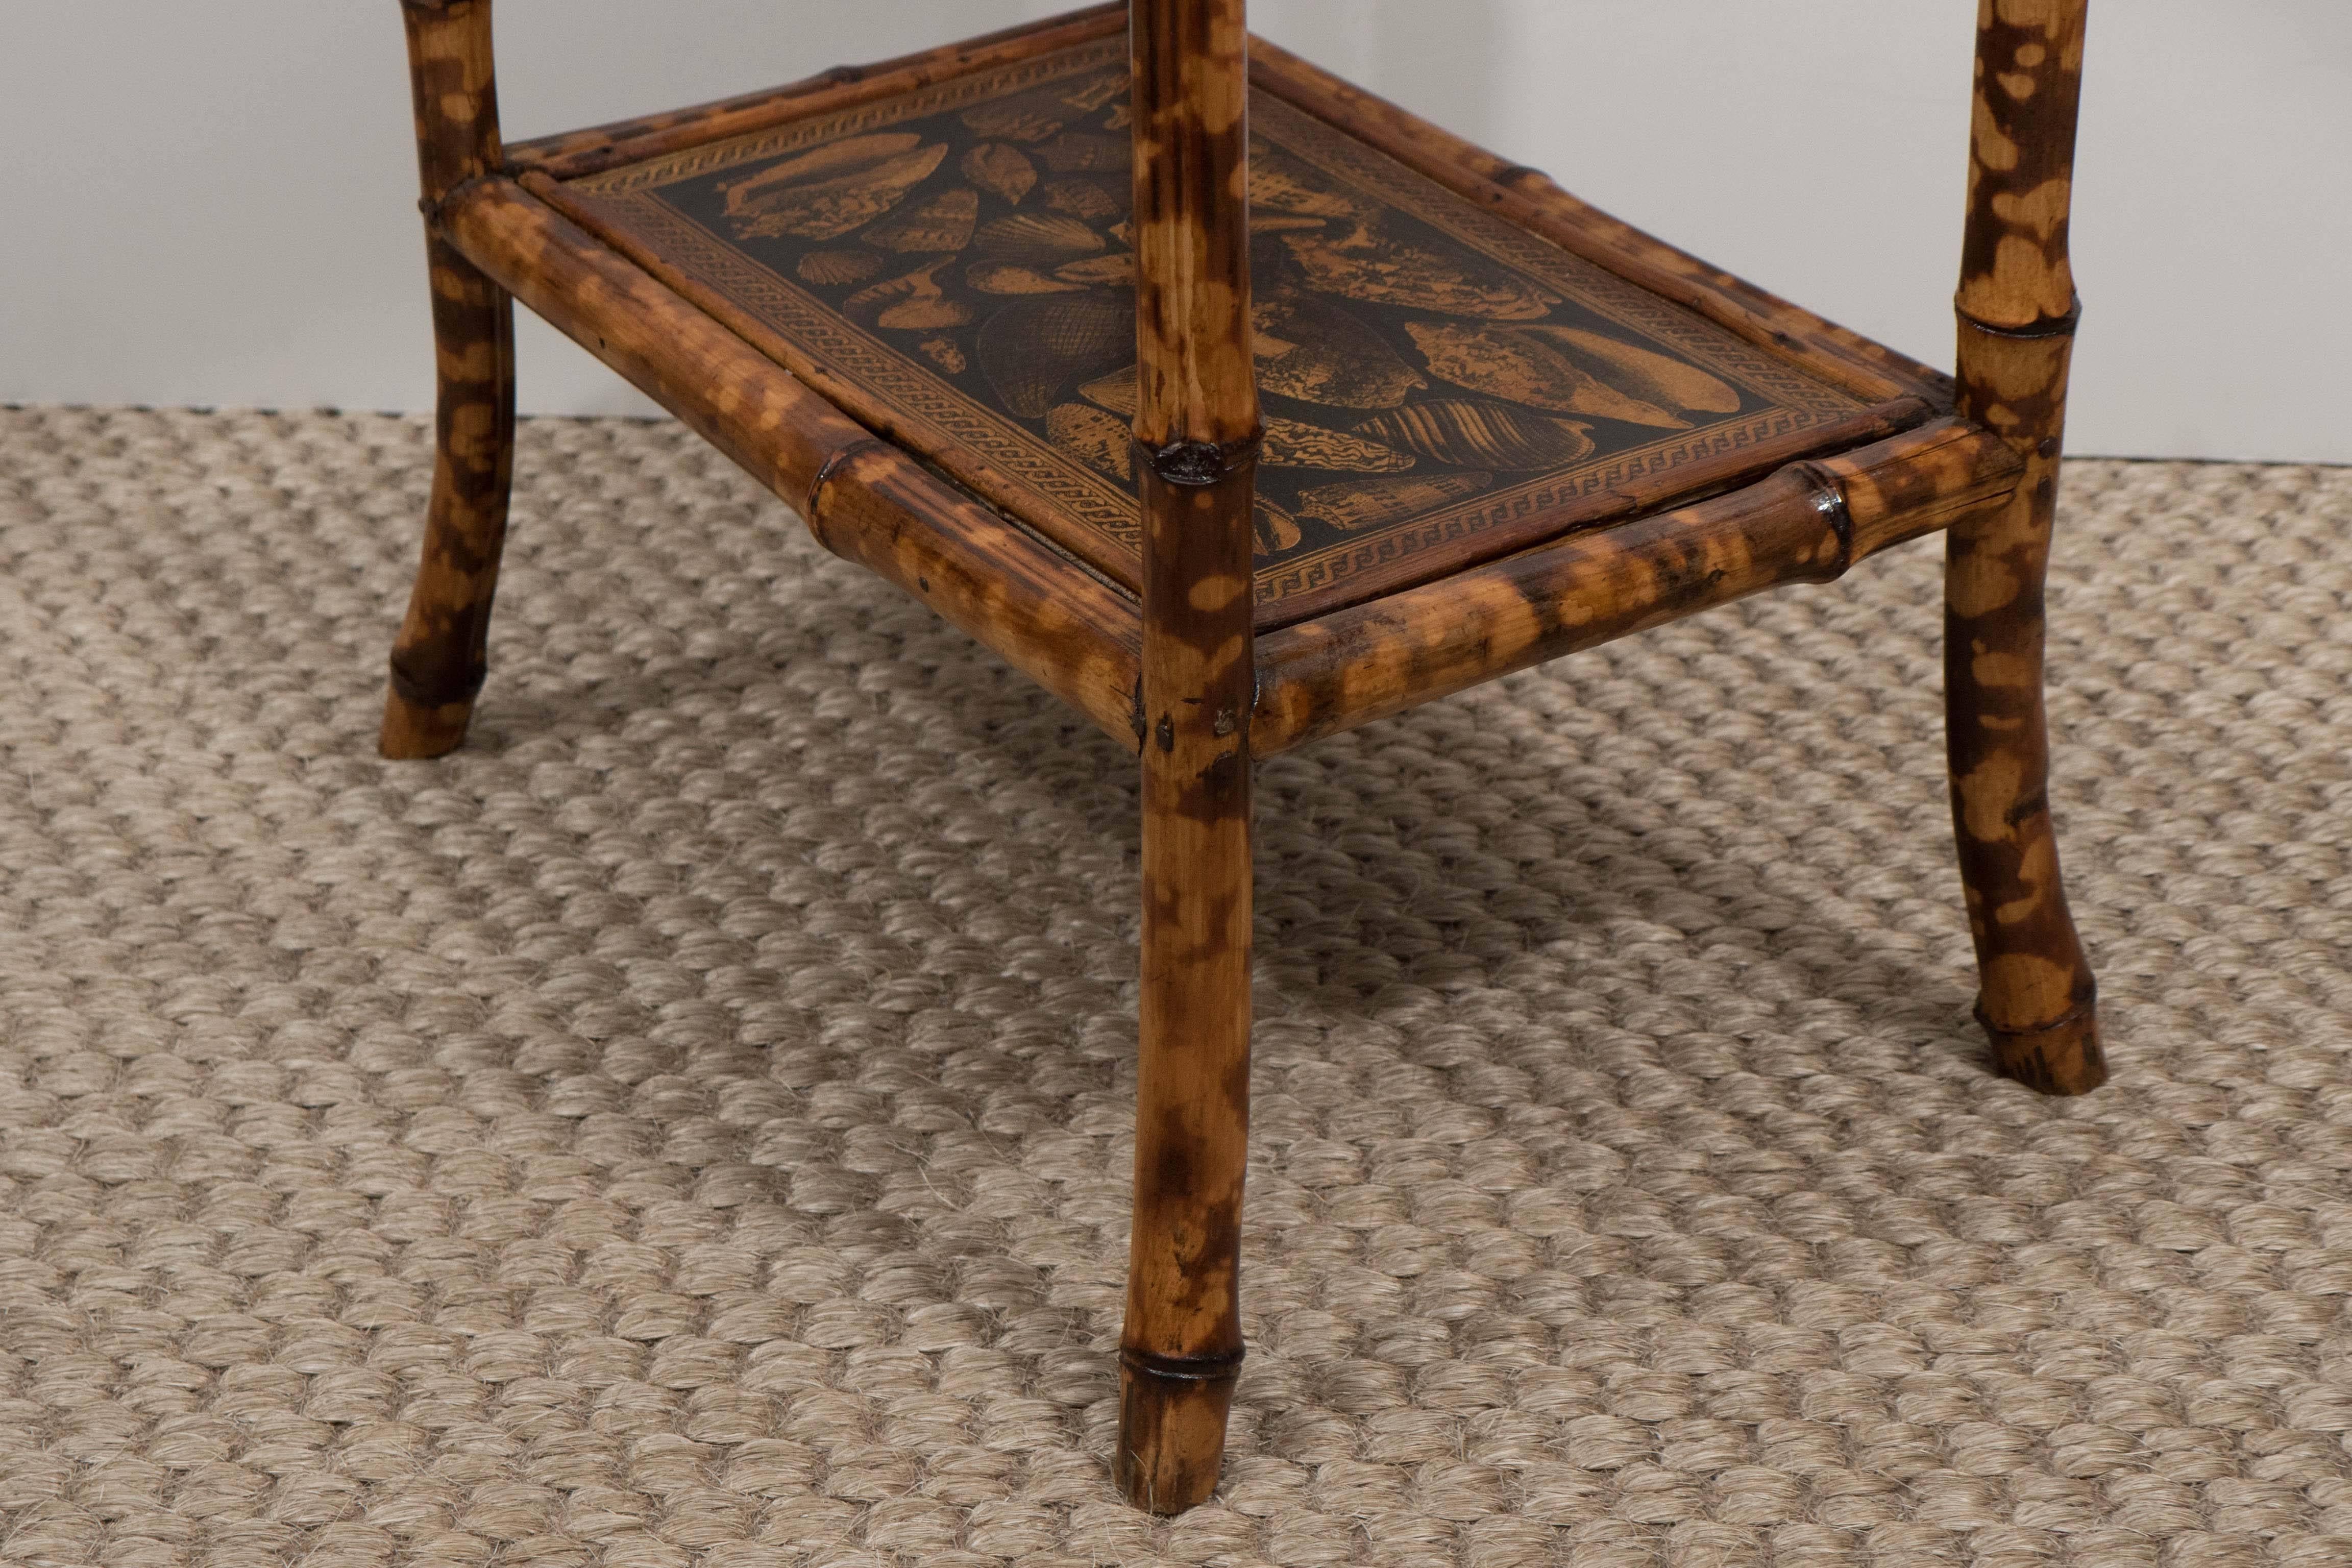 19th Century Small Bamboo Table with Decoupage Shells